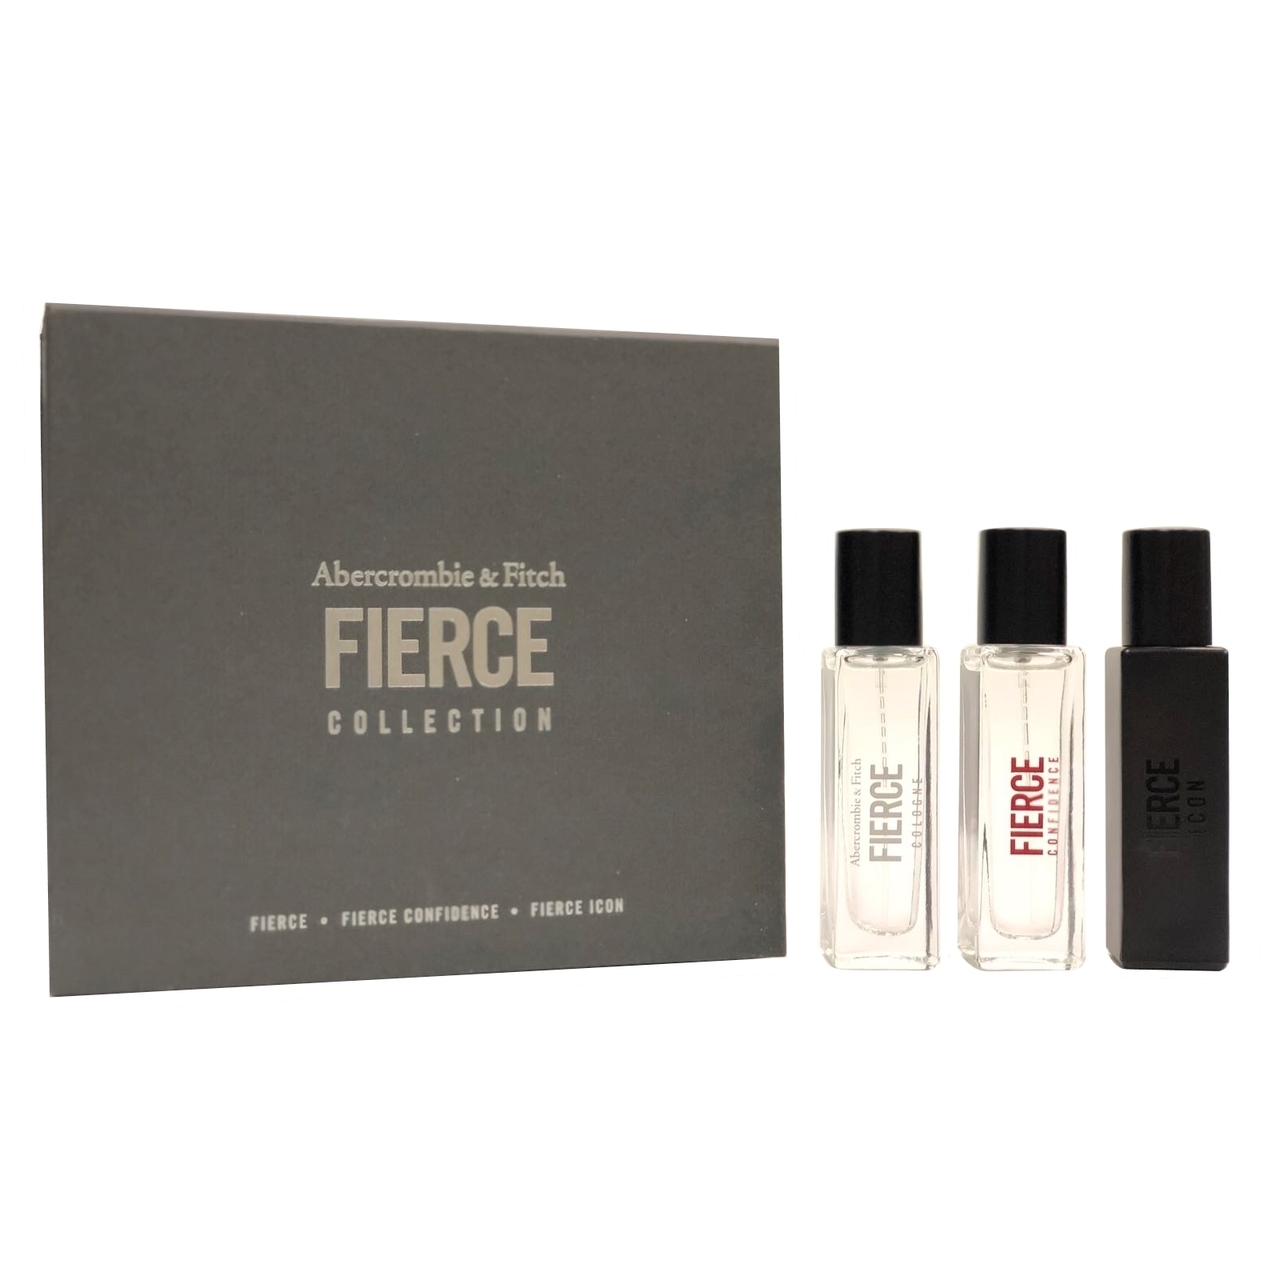 Abercrombie & Fitch Fierce 3 Piece Collection For Men